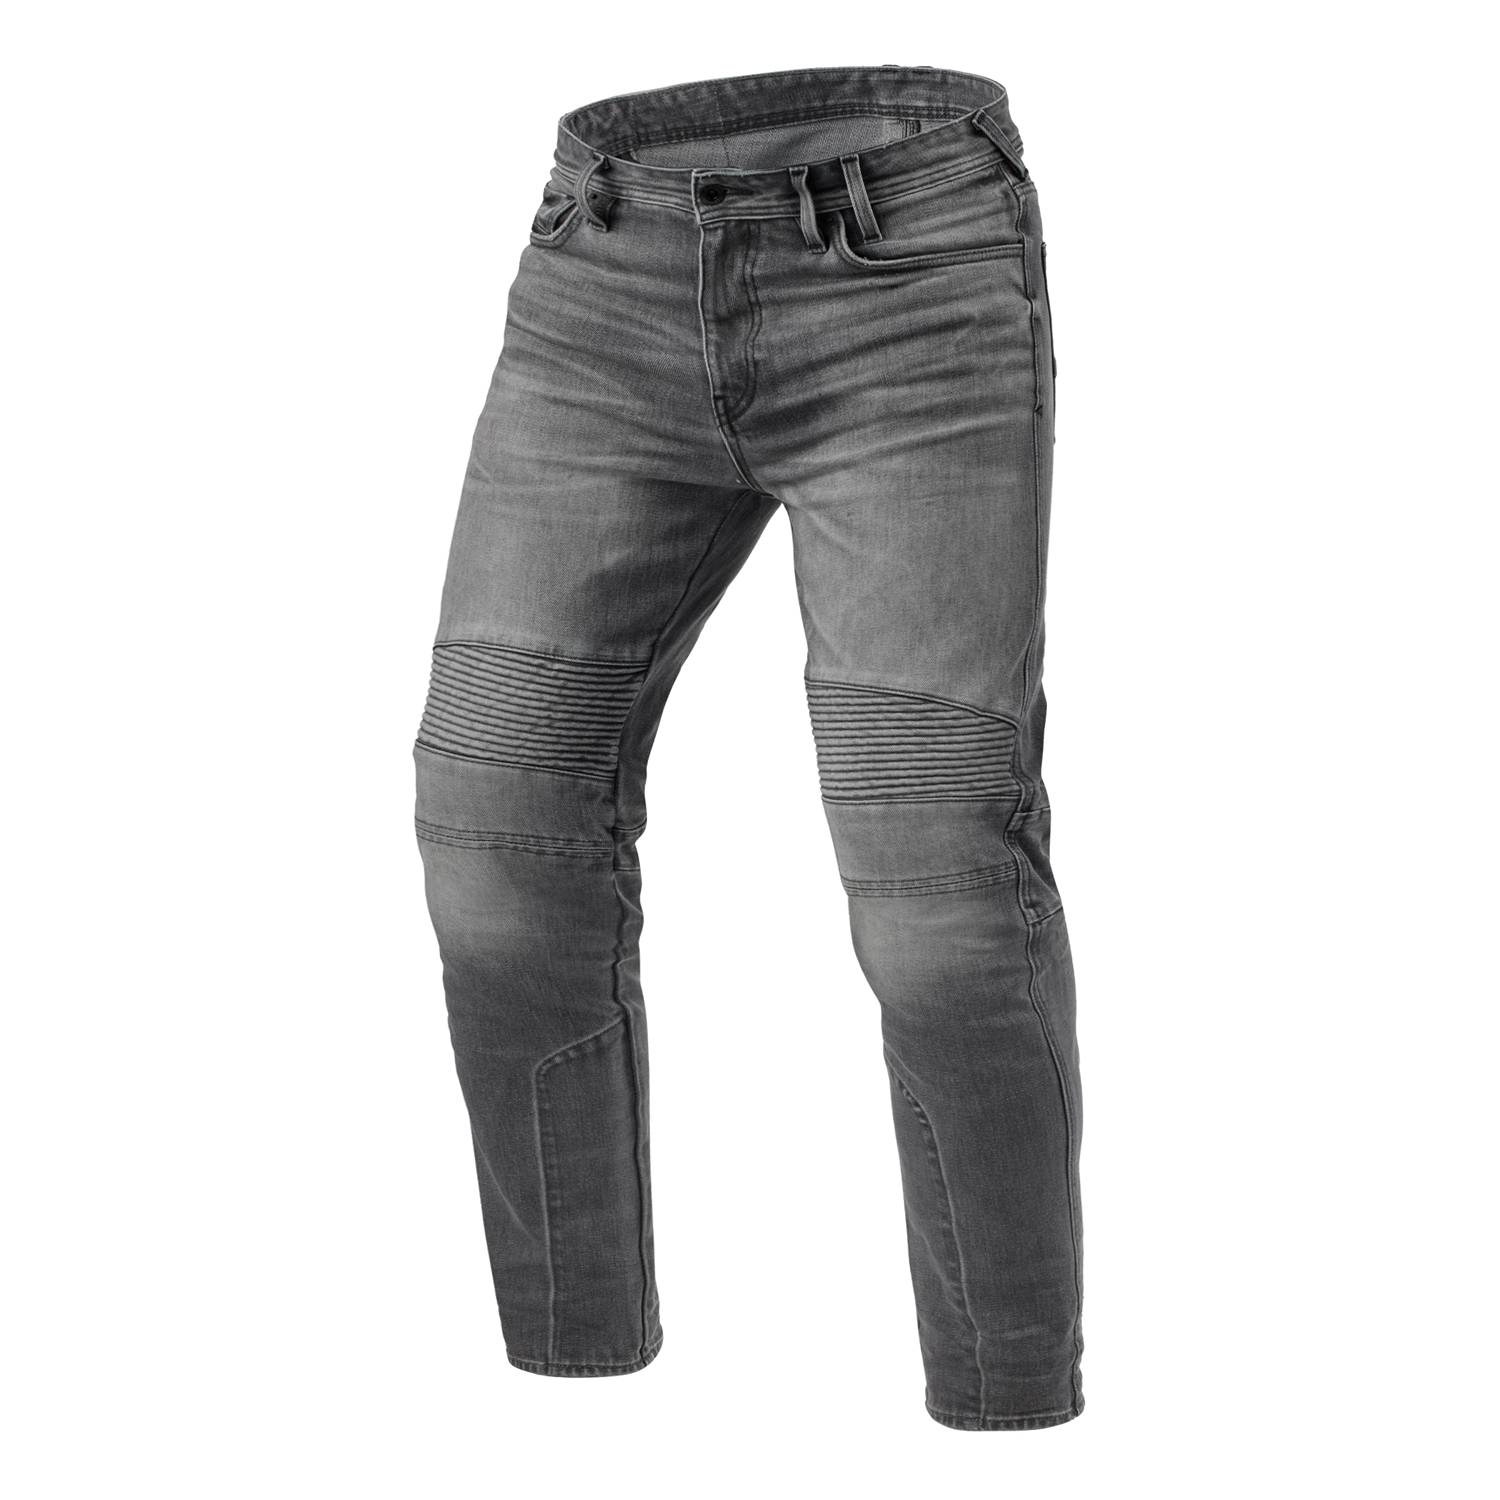 Image of EU REV'IT! Jeans Moto 2 TF Medium Grey Used L36 Motorcycle Jeans Taille L36/W33